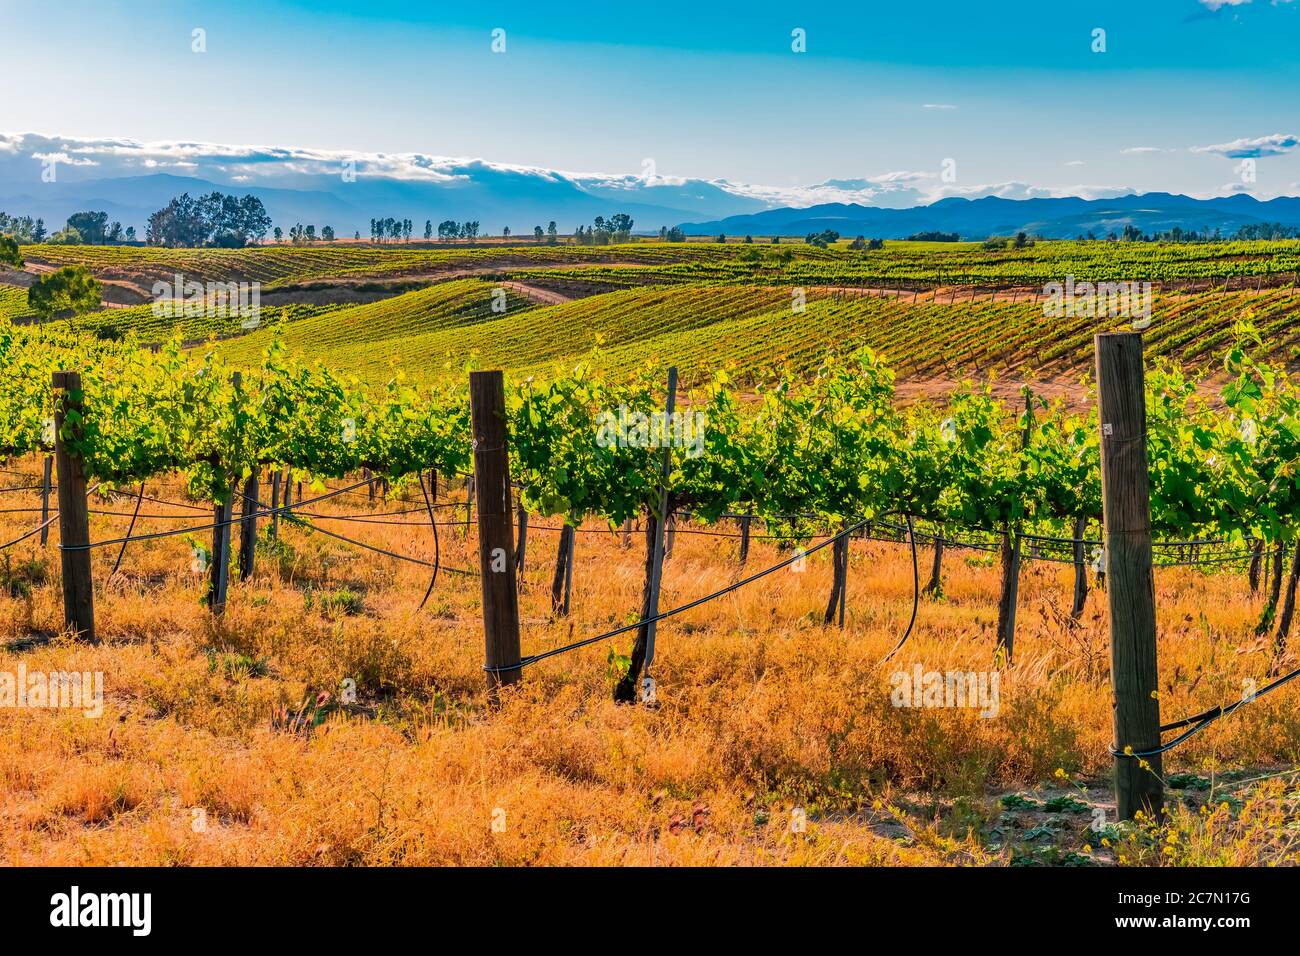 Bright green Vineyards grow on the rolling hills of Temecula Valley in Southern California in the last light of the day. Stock Photo